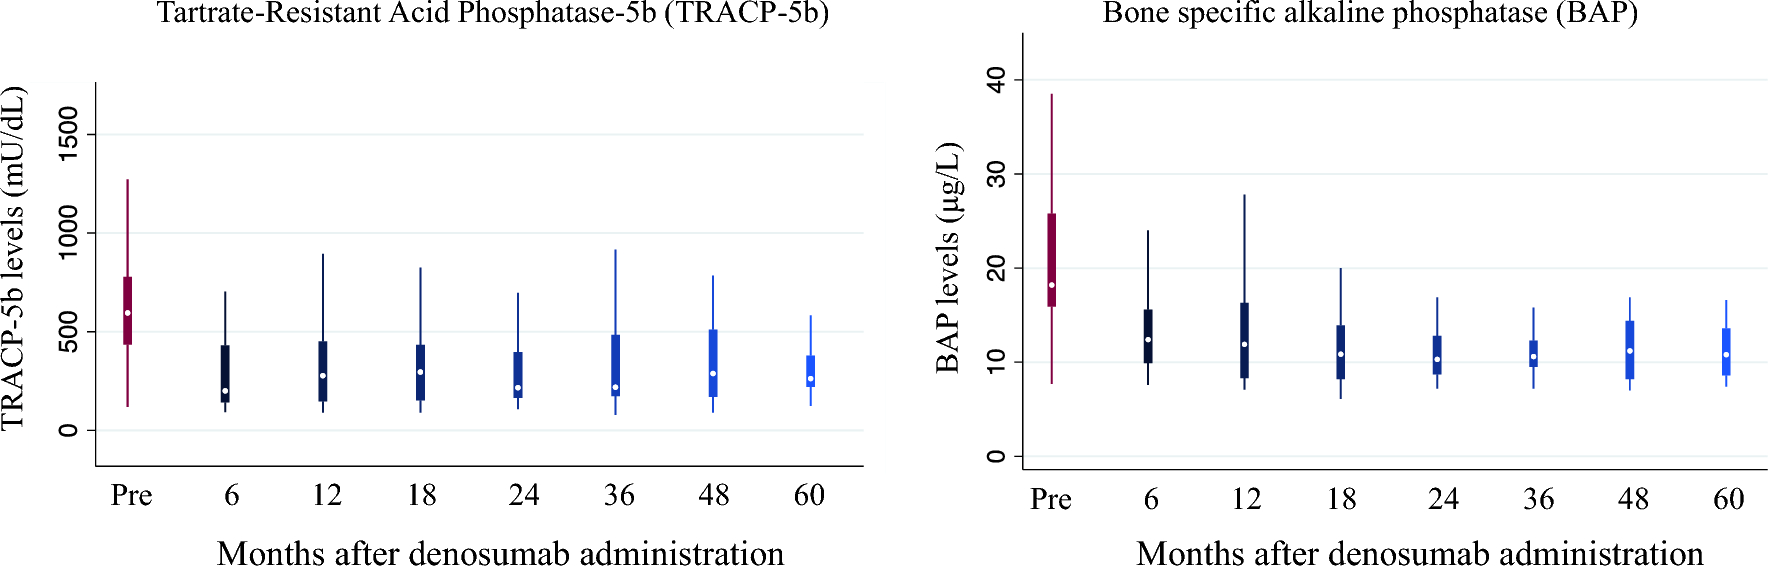 Long-term effects of denosumab on bone mineral density and turnover markers in patients undergoing hemodialysis